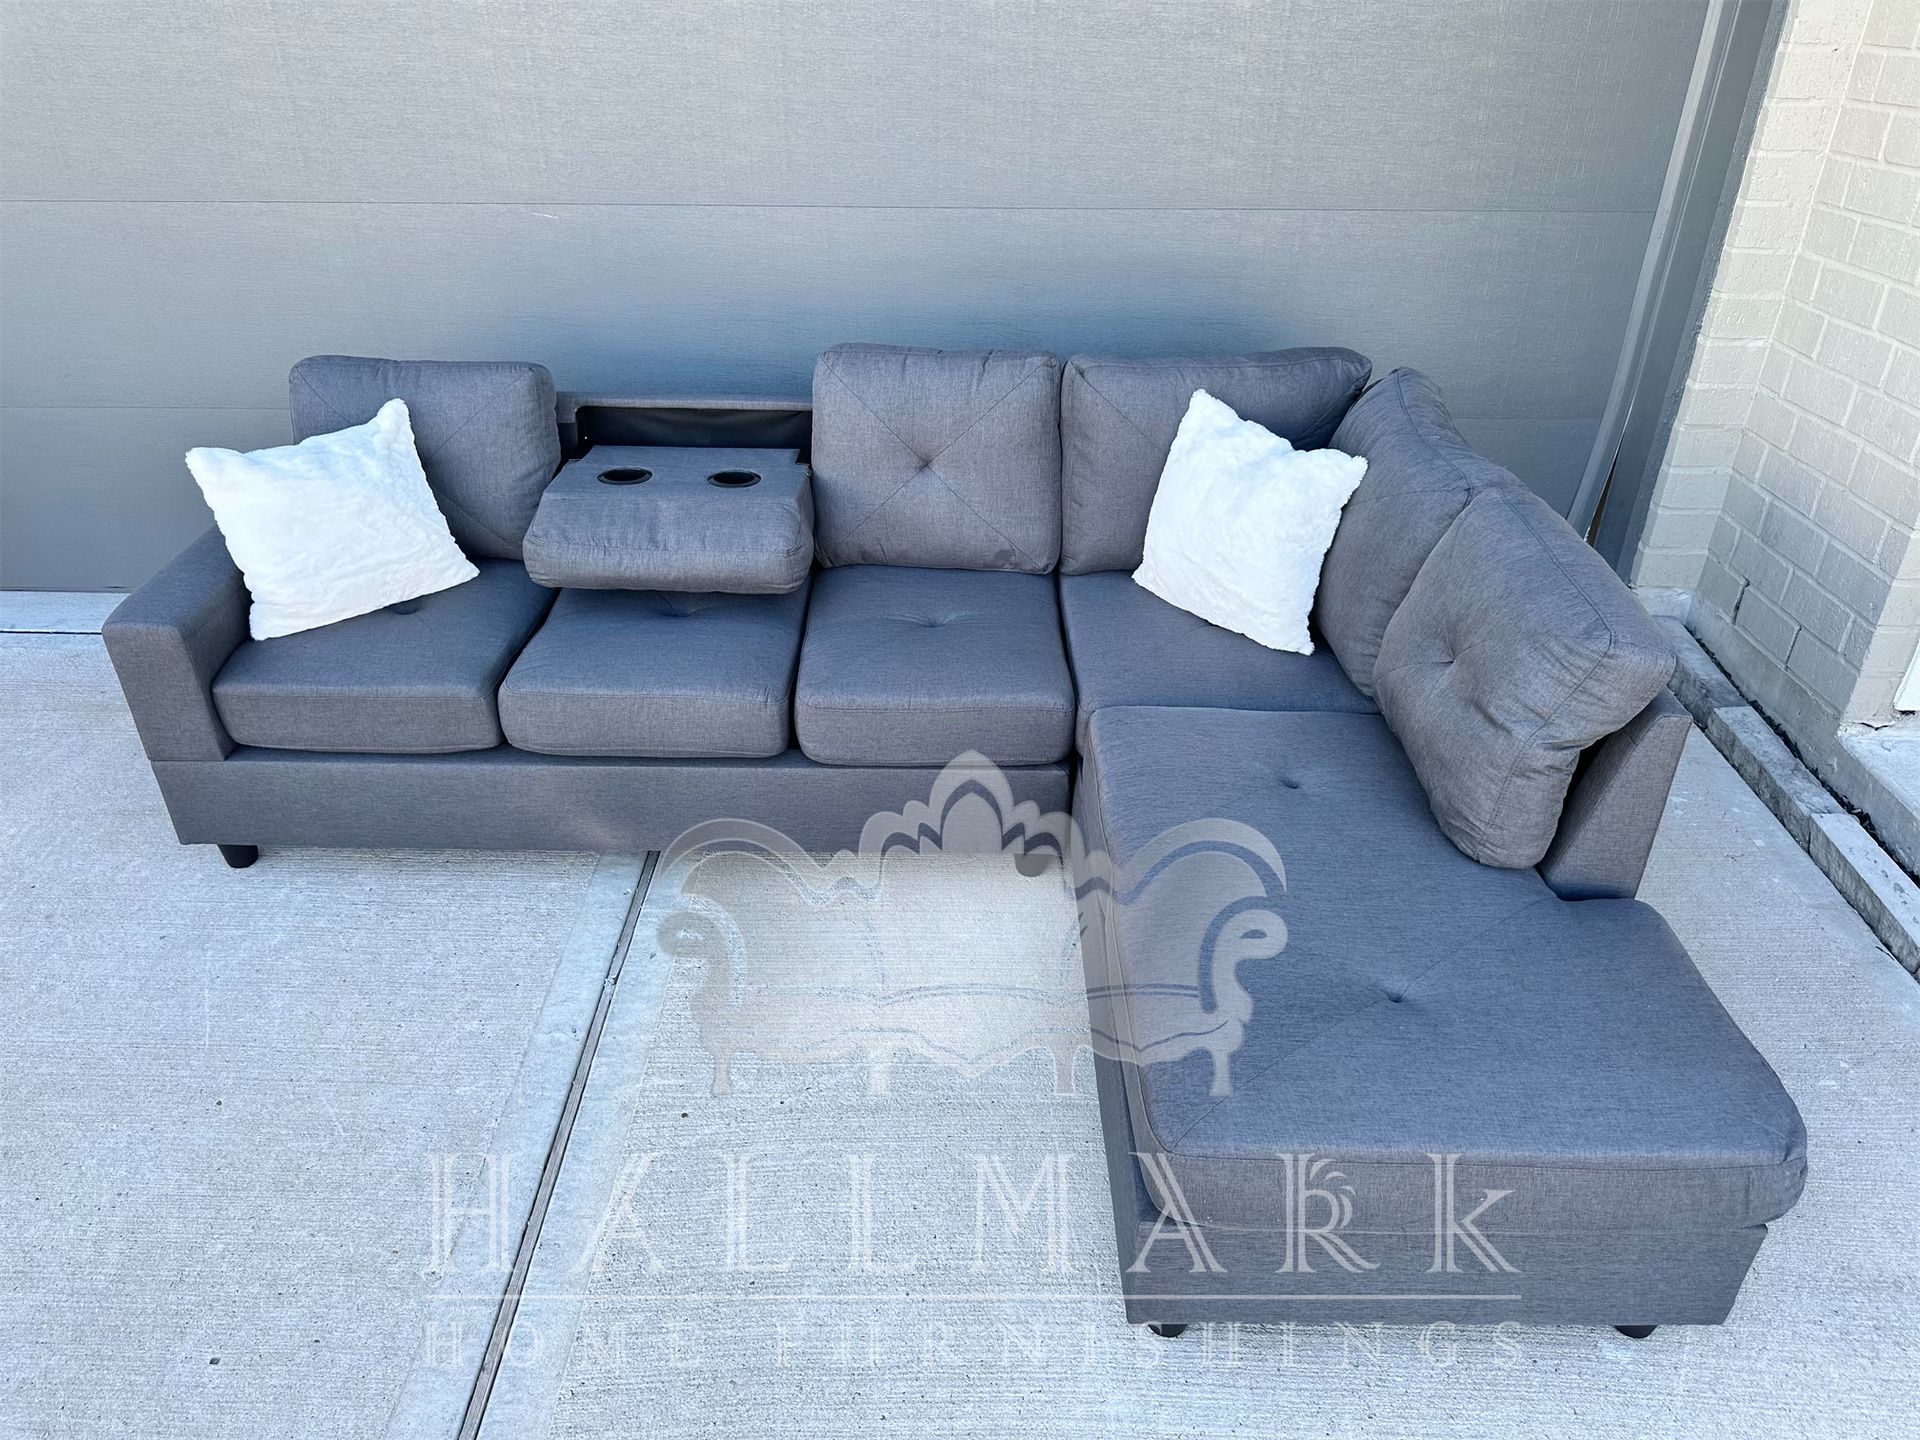 New In Box Grey Sectional 